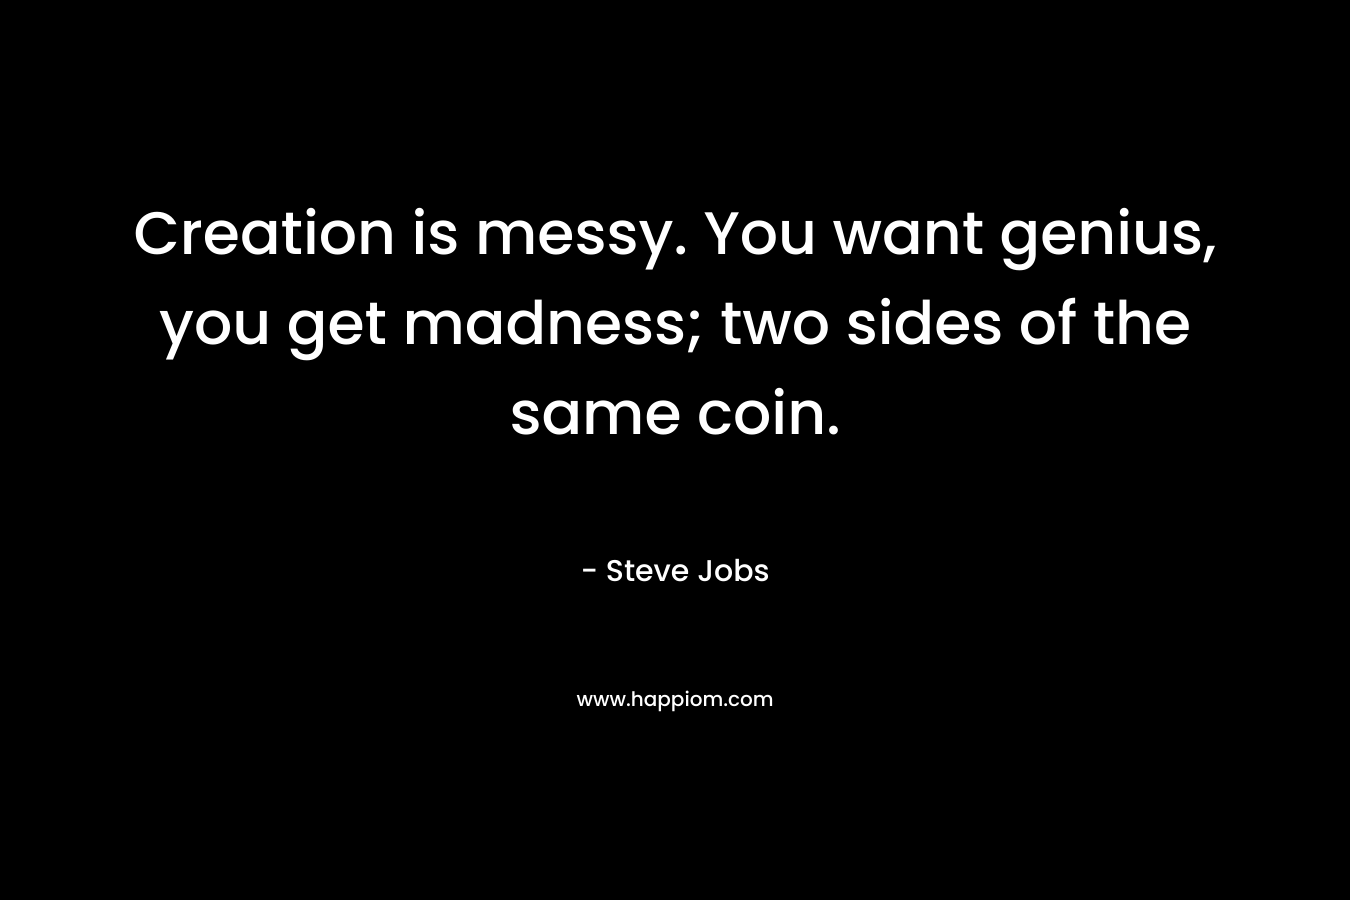 Creation is messy. You want genius, you get madness; two sides of the same coin.